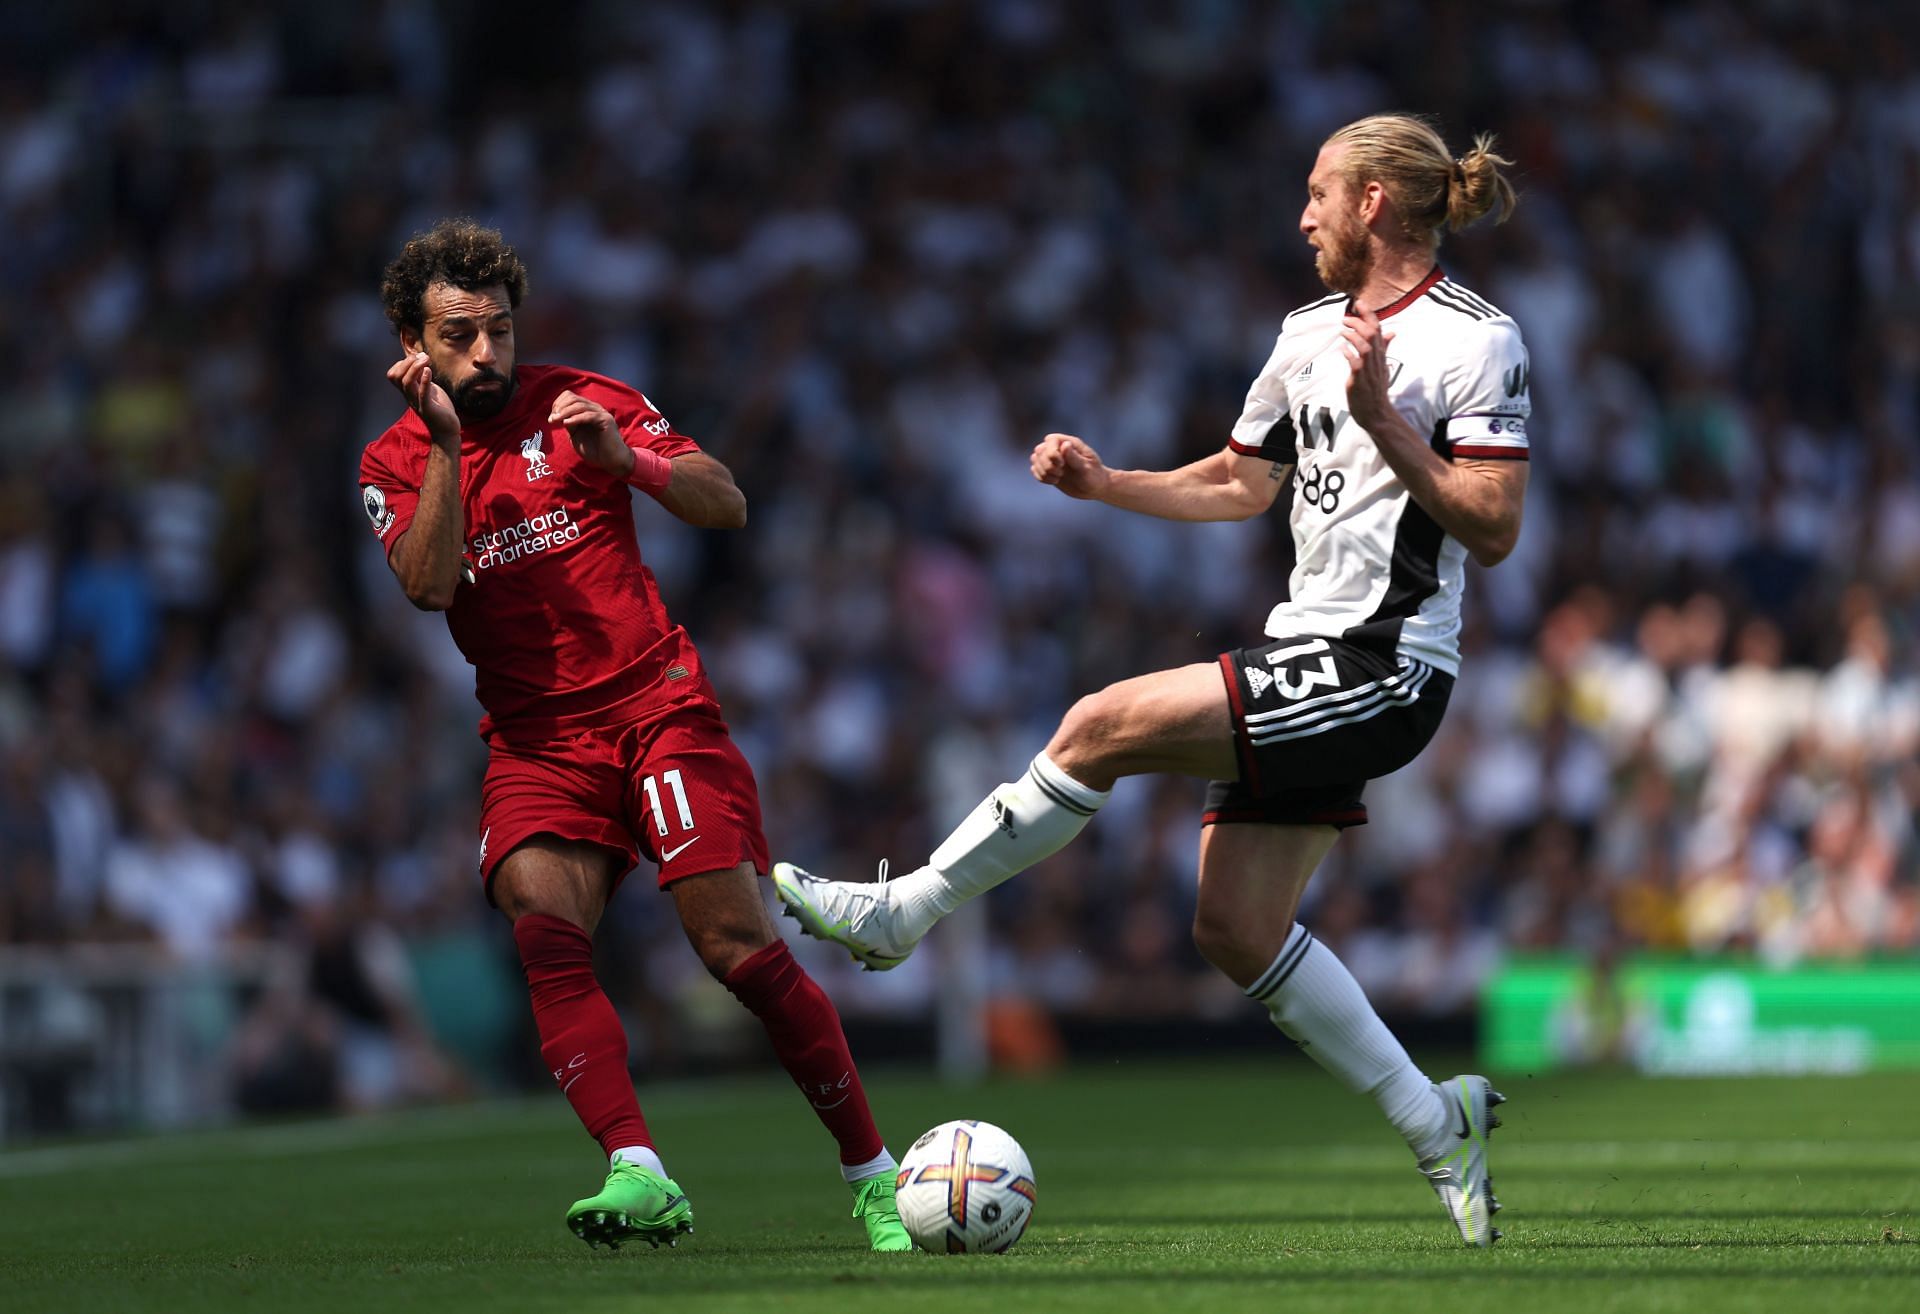 Liverpool and Fulham played out a 2-2 draw in their Premier League clash at Craven Cottage on Saturday.